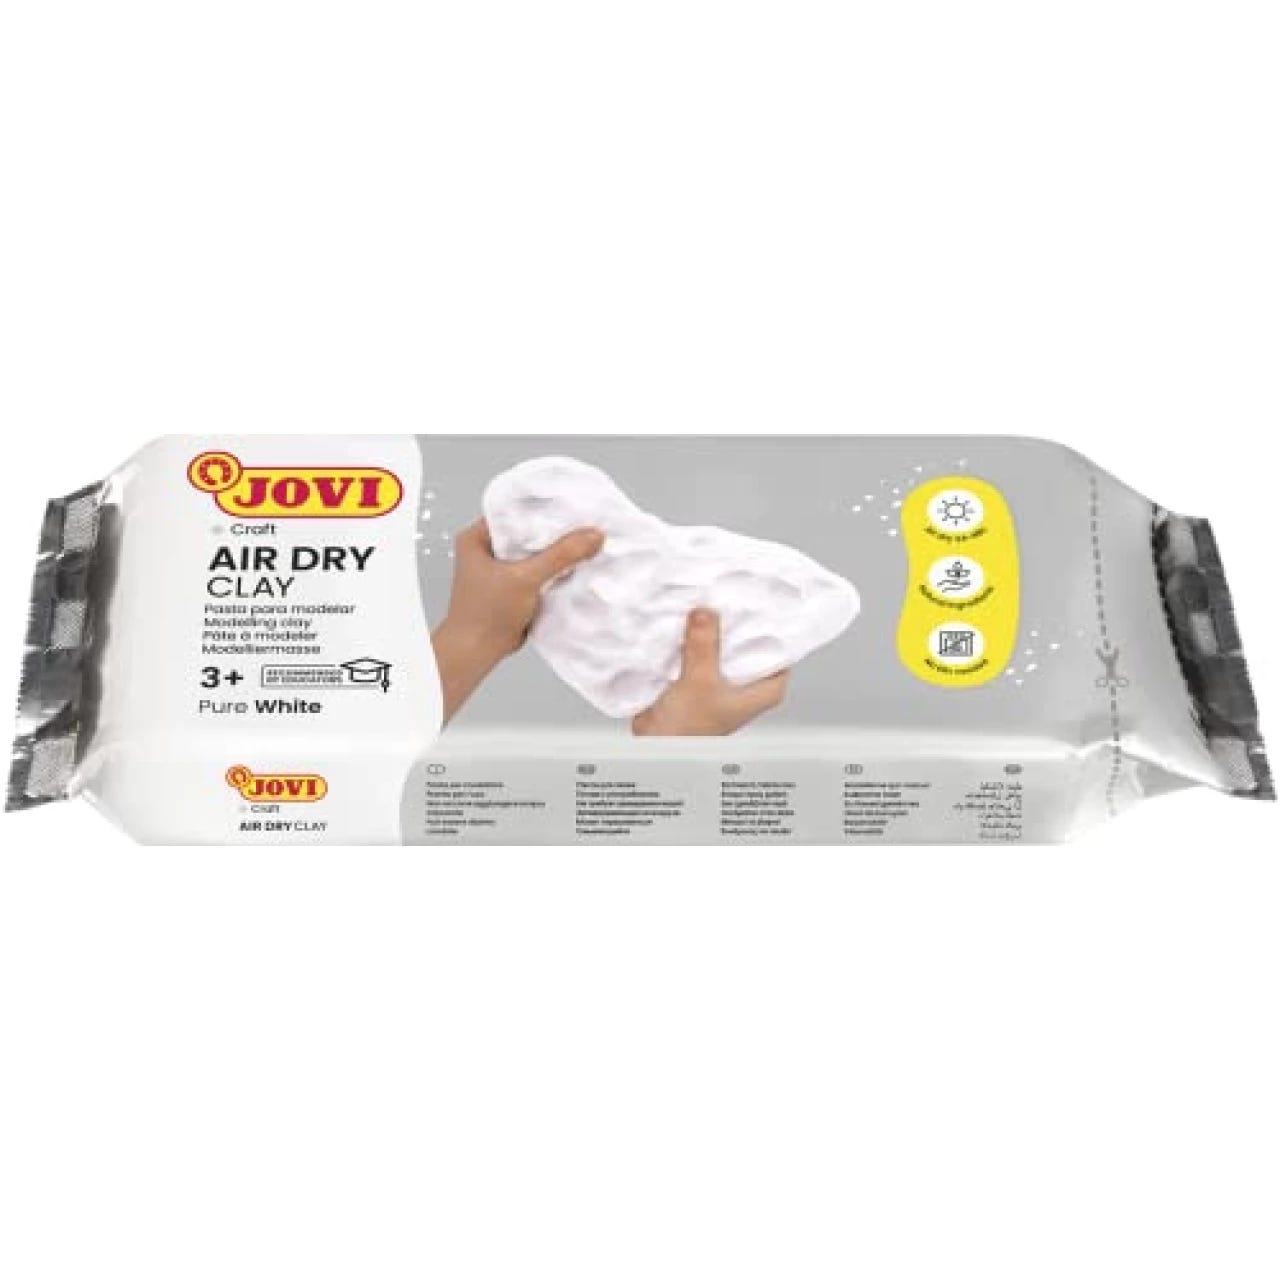 ACTIVA Supreme Artist's Air-Dry Modelling, 2.2 pounds, White Clay